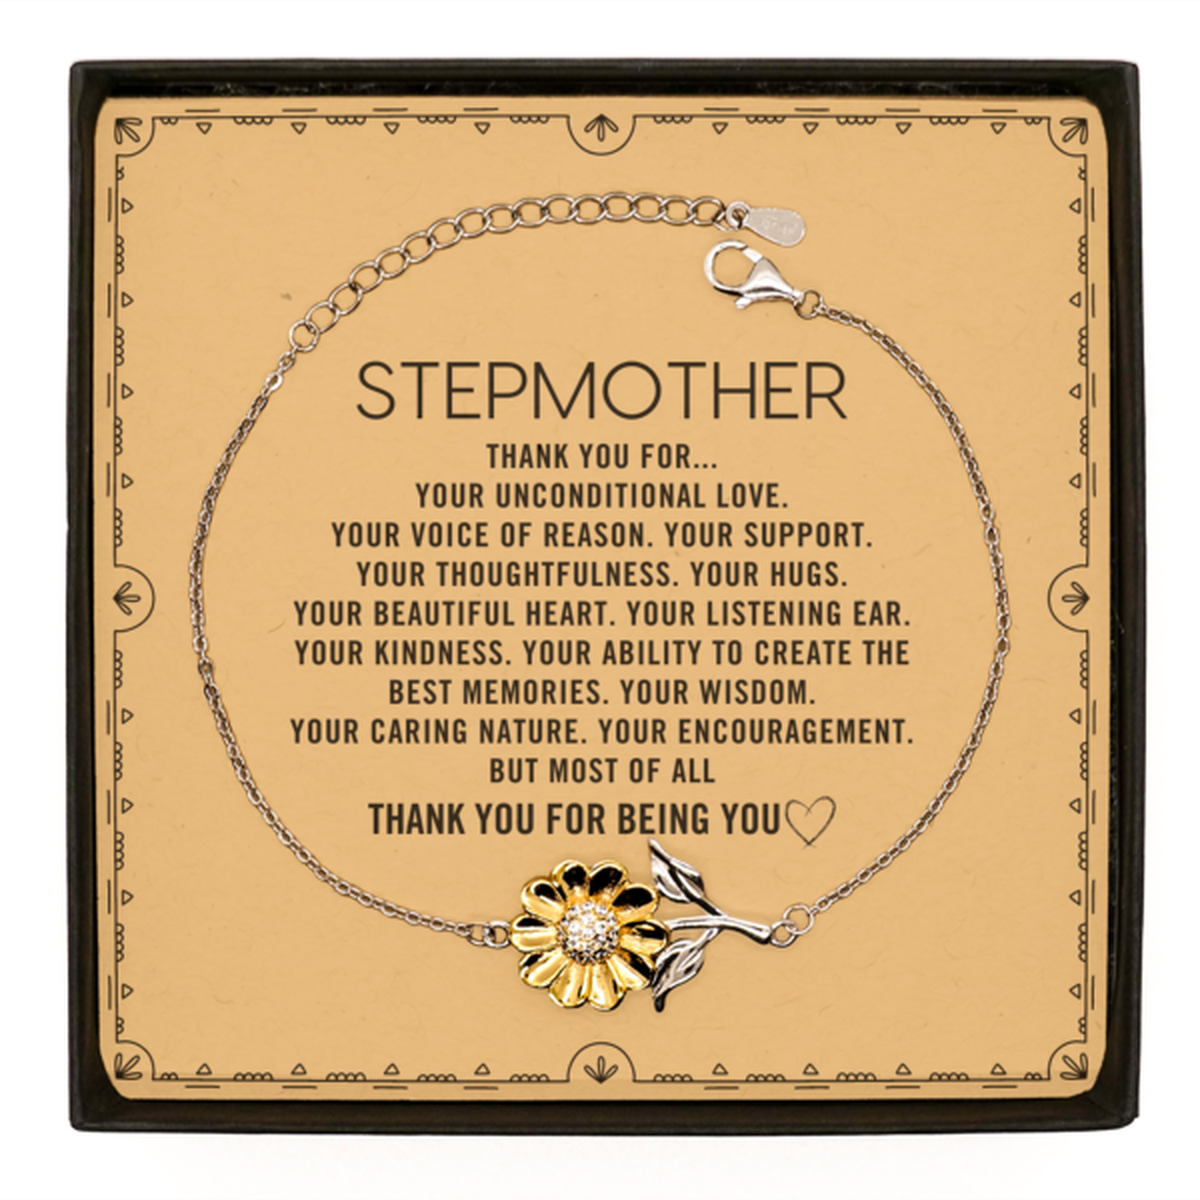 Stepmother Sunflower Bracelet Custom, Message Card Gifts For Stepmother Christmas Graduation Birthday Gifts for Men Women Stepmother Thank you for Your unconditional love